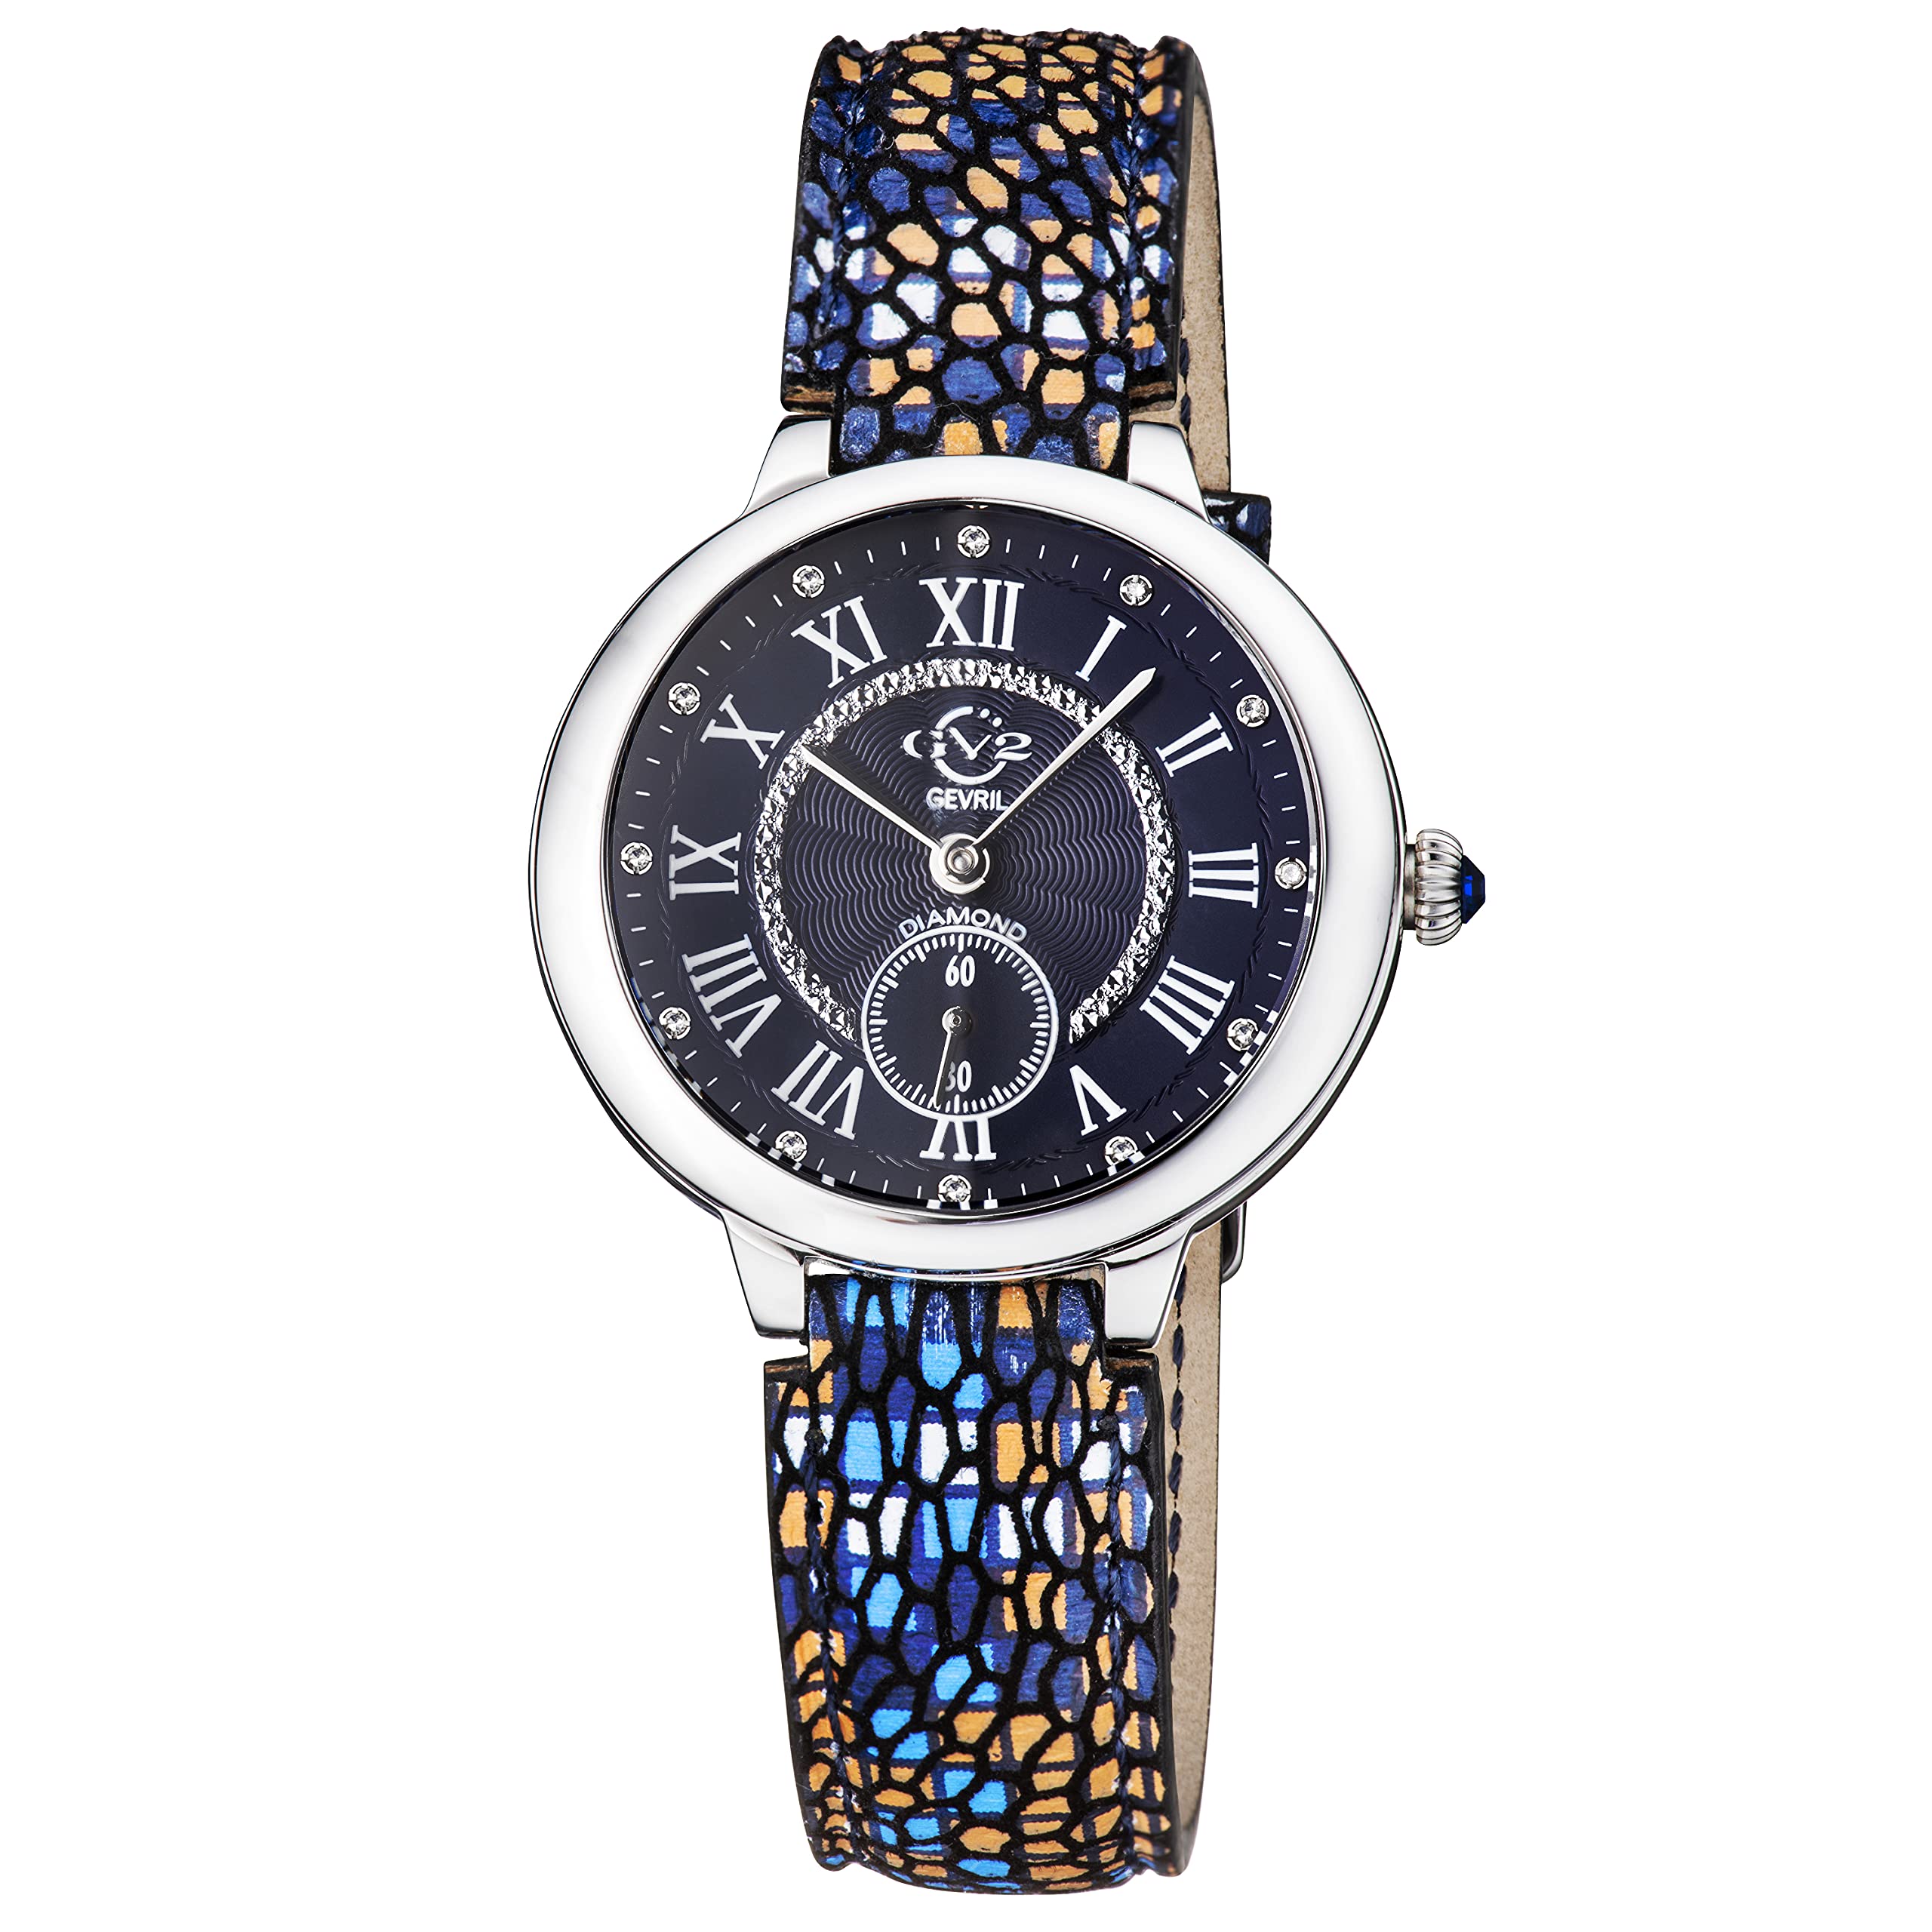 GV2 by Gevril Women's Stainless Steel Swiss Quartz Watch with Leather Strap, Blue Multi, 16 (Model: 12205S)